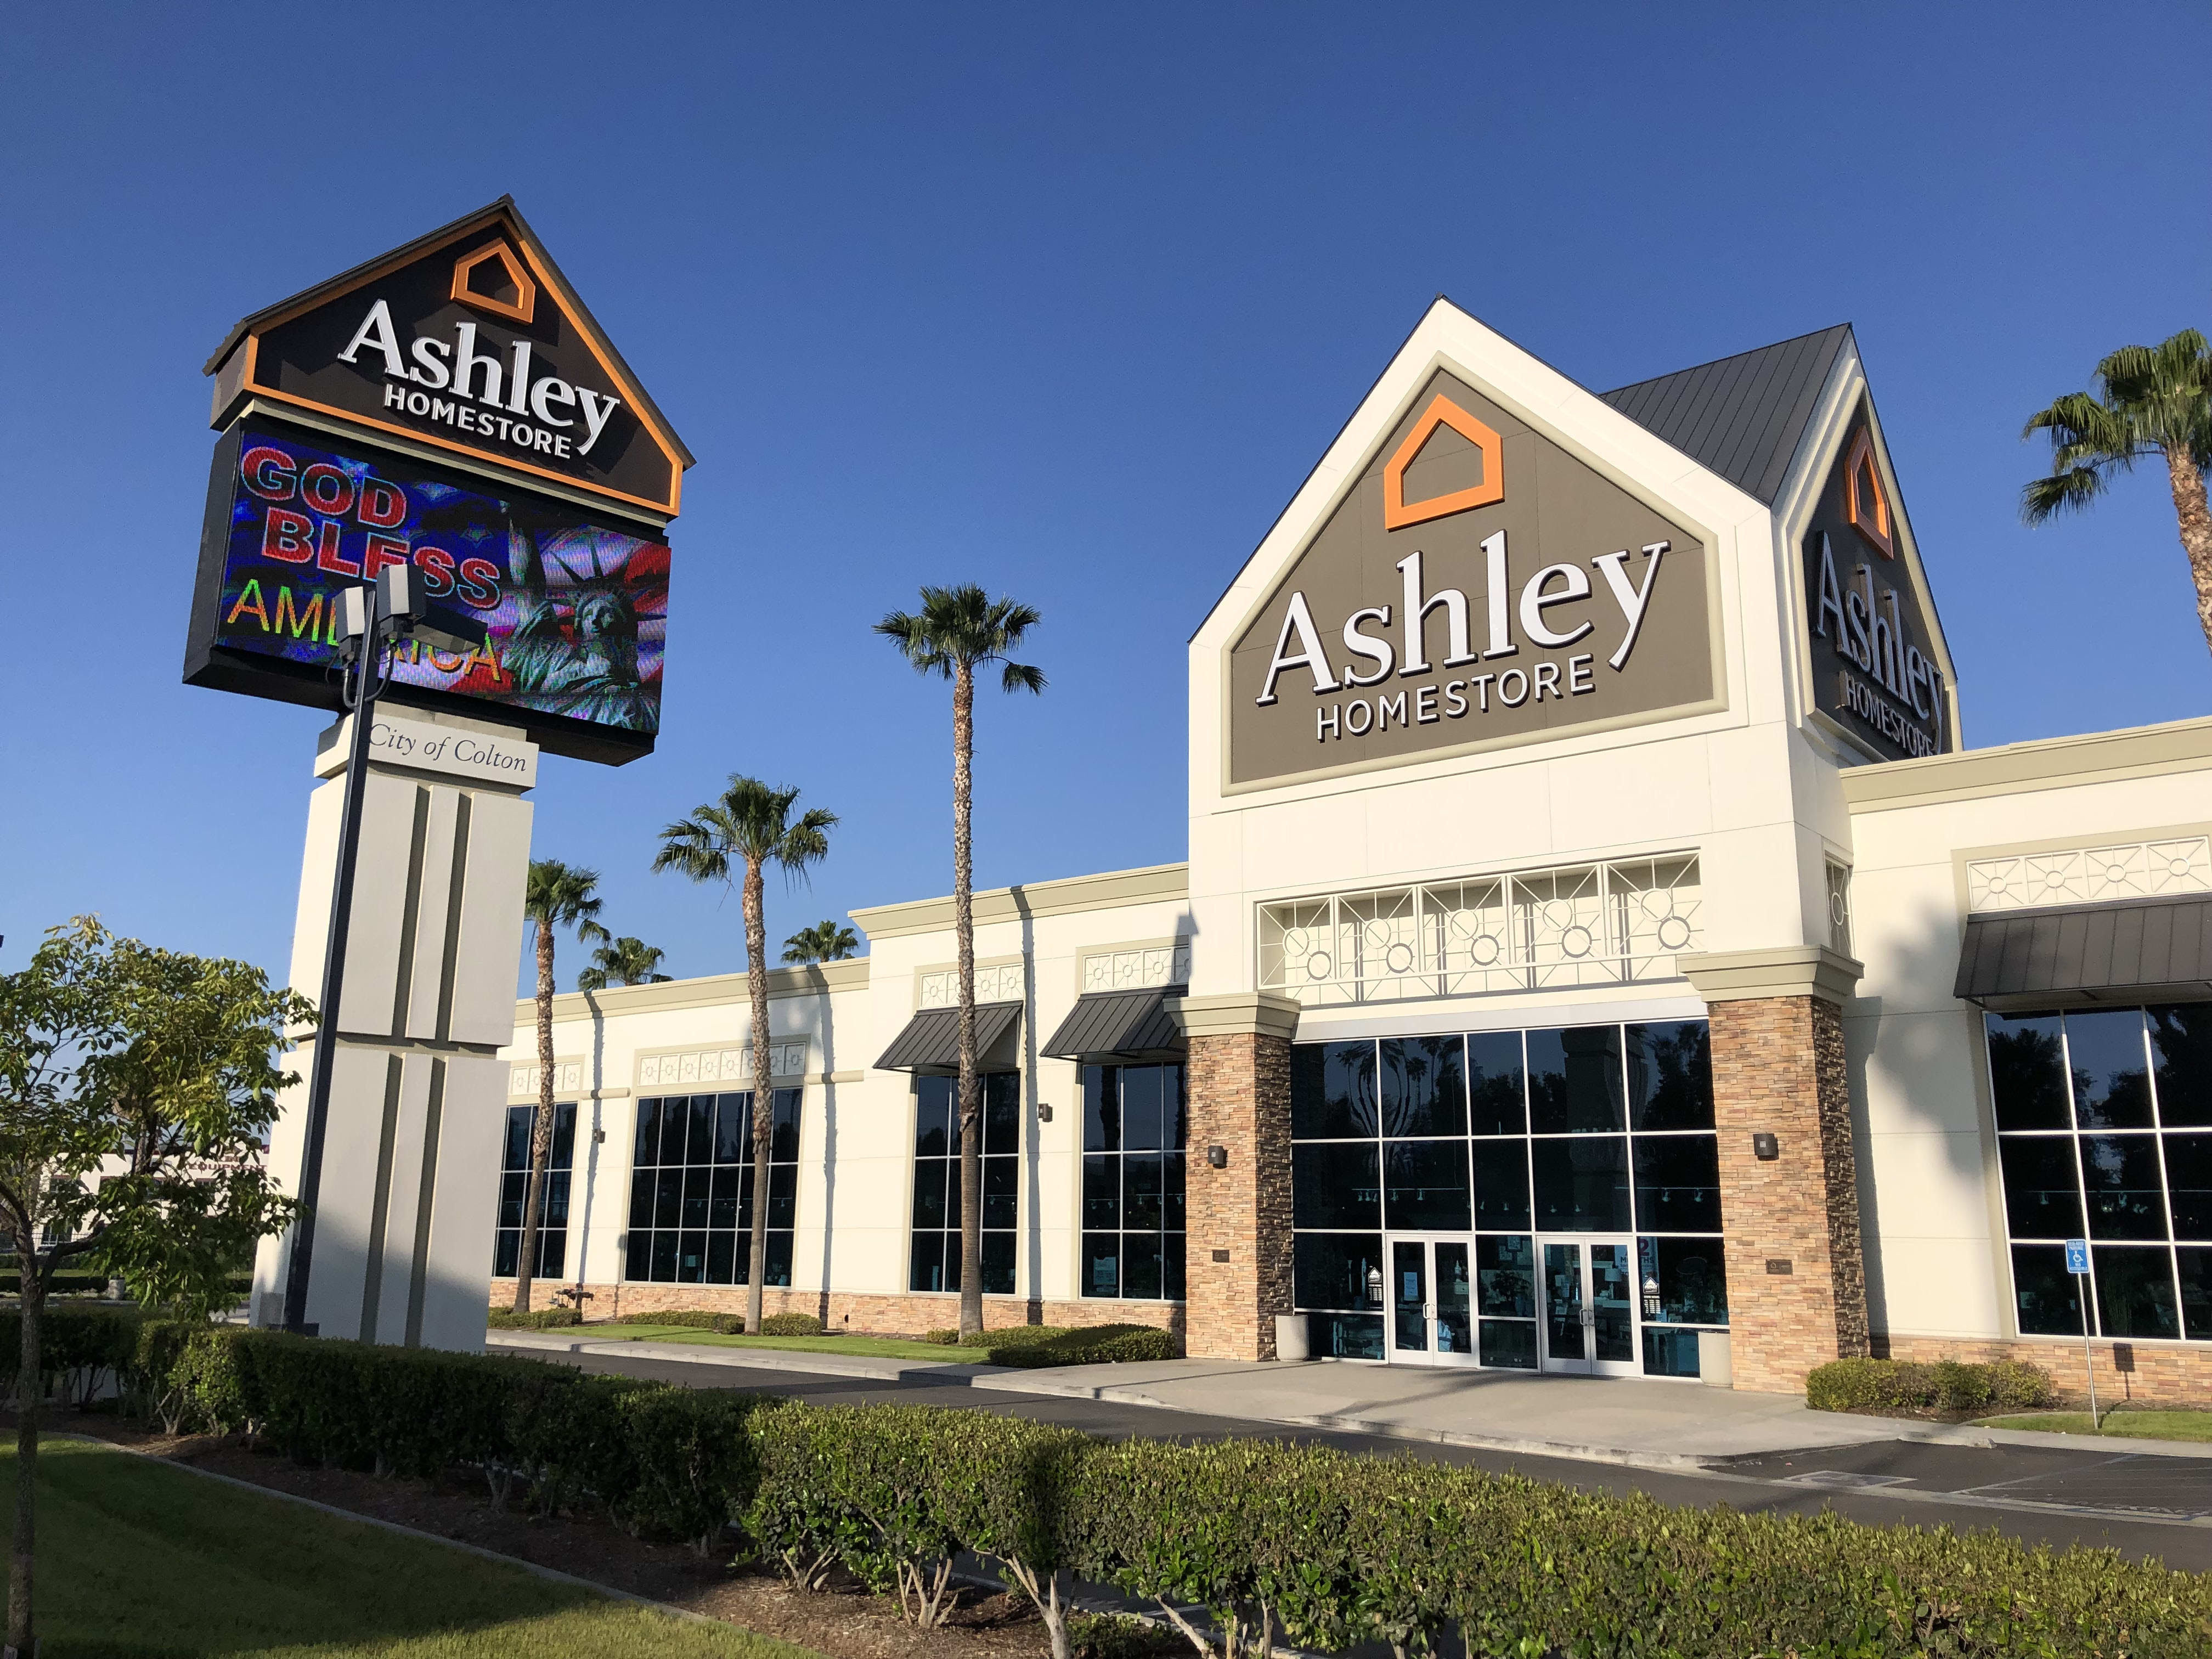 The location employed 840 people, who will be laid off. Furniture And Mattress Store At 855 Ashley Way Colton Ca Ashley Homestore